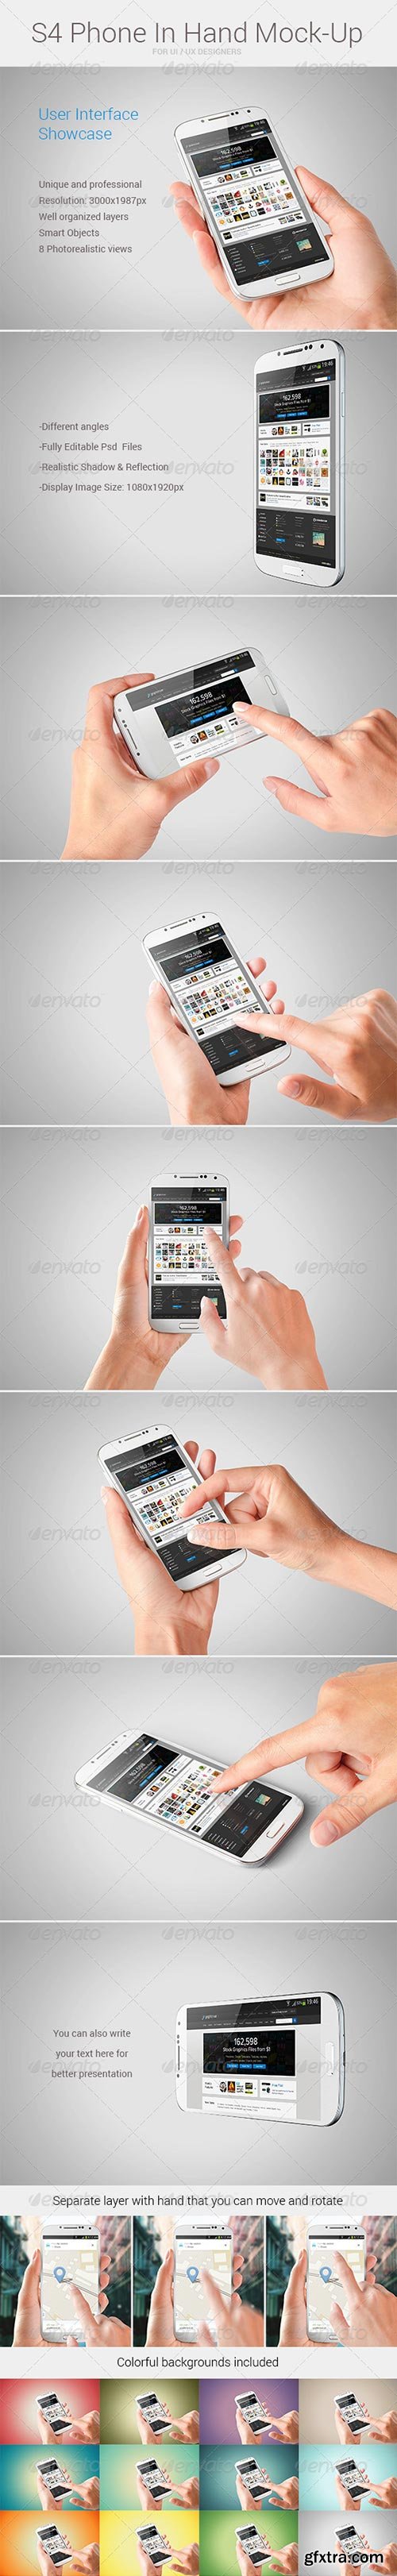 GraphicRiver - S4 Phone In Hand Mock-Up 5965017